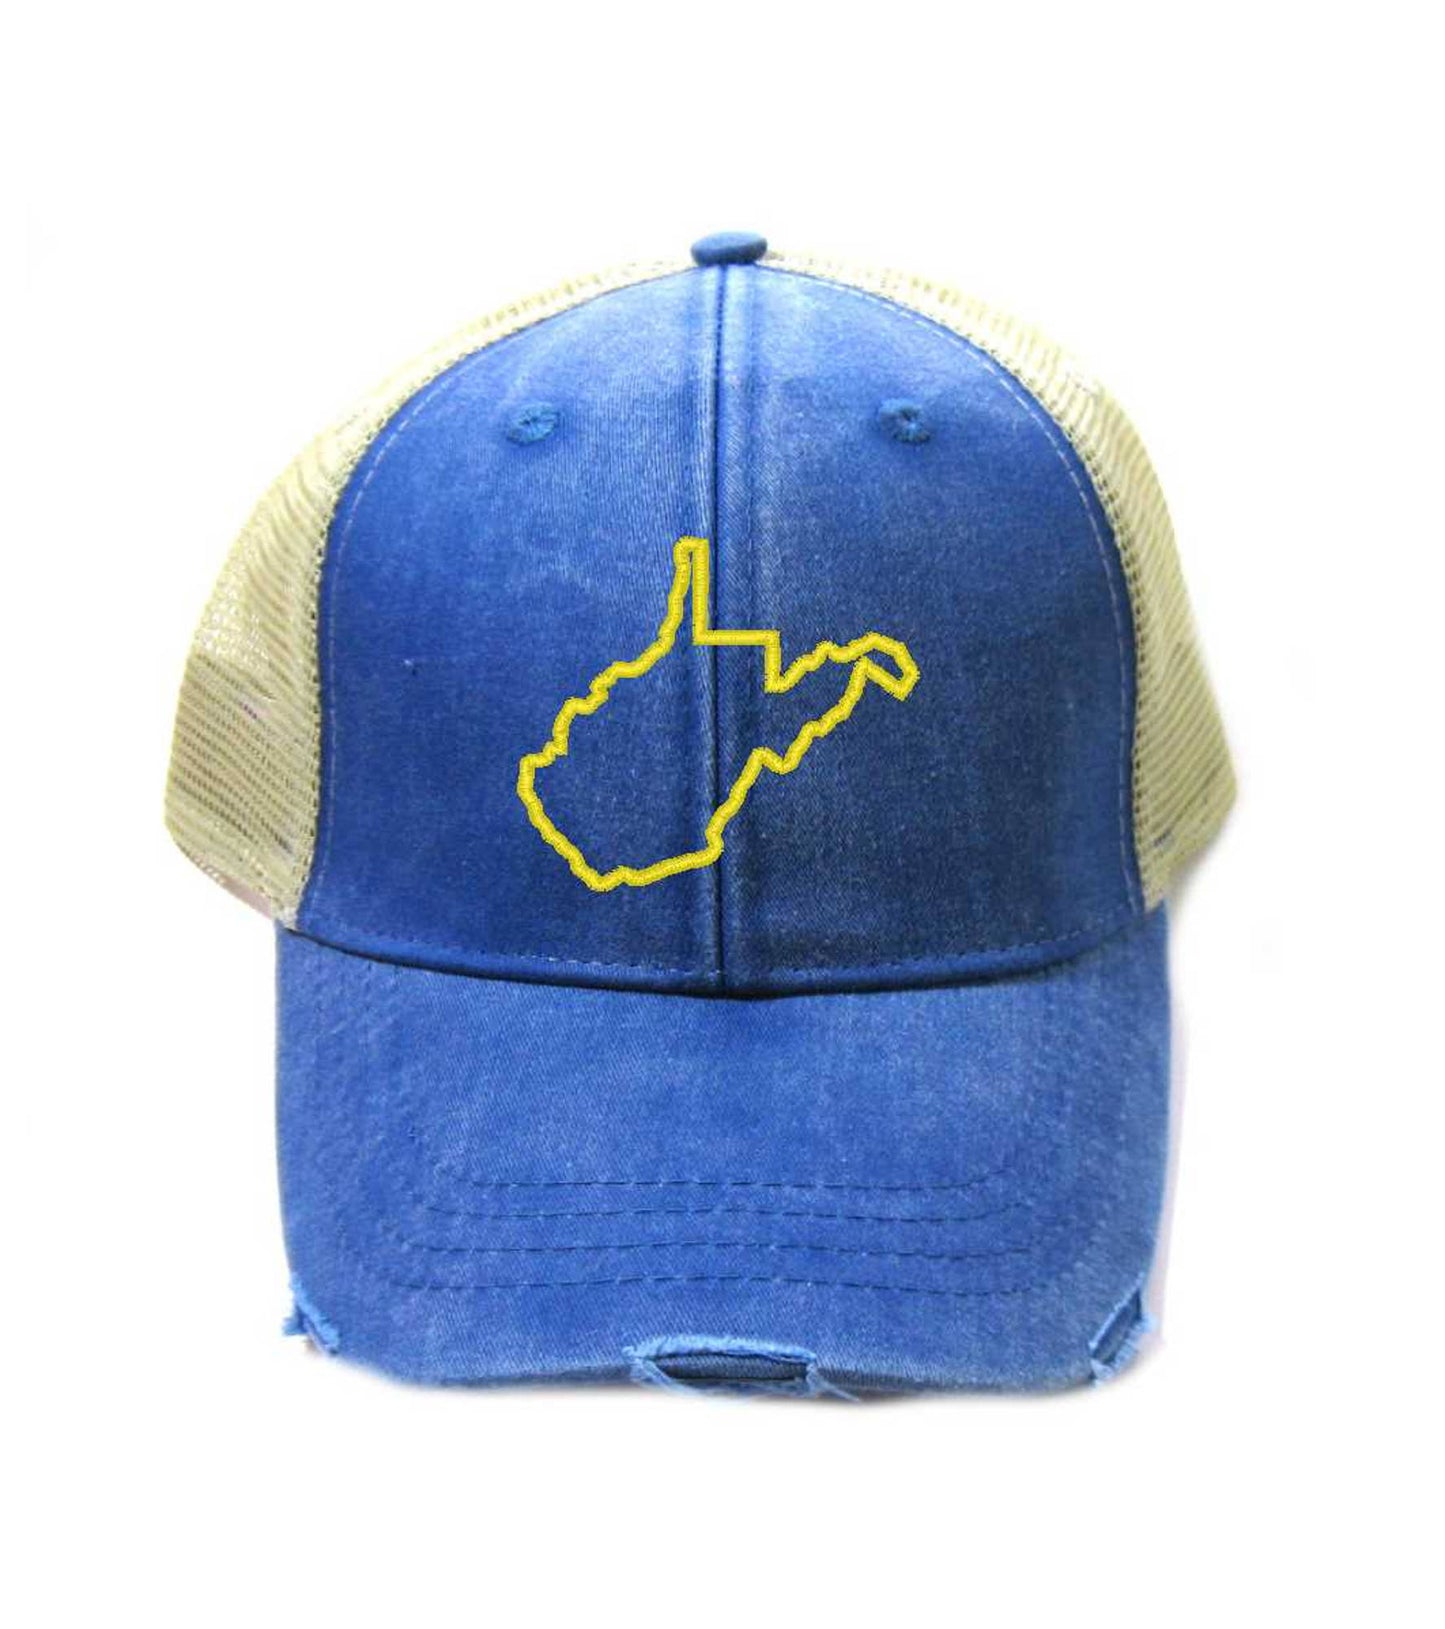 West Virginia Hat - Distressed Snapback Trucker Hat - West Virginia State Outline - Many Colors Available